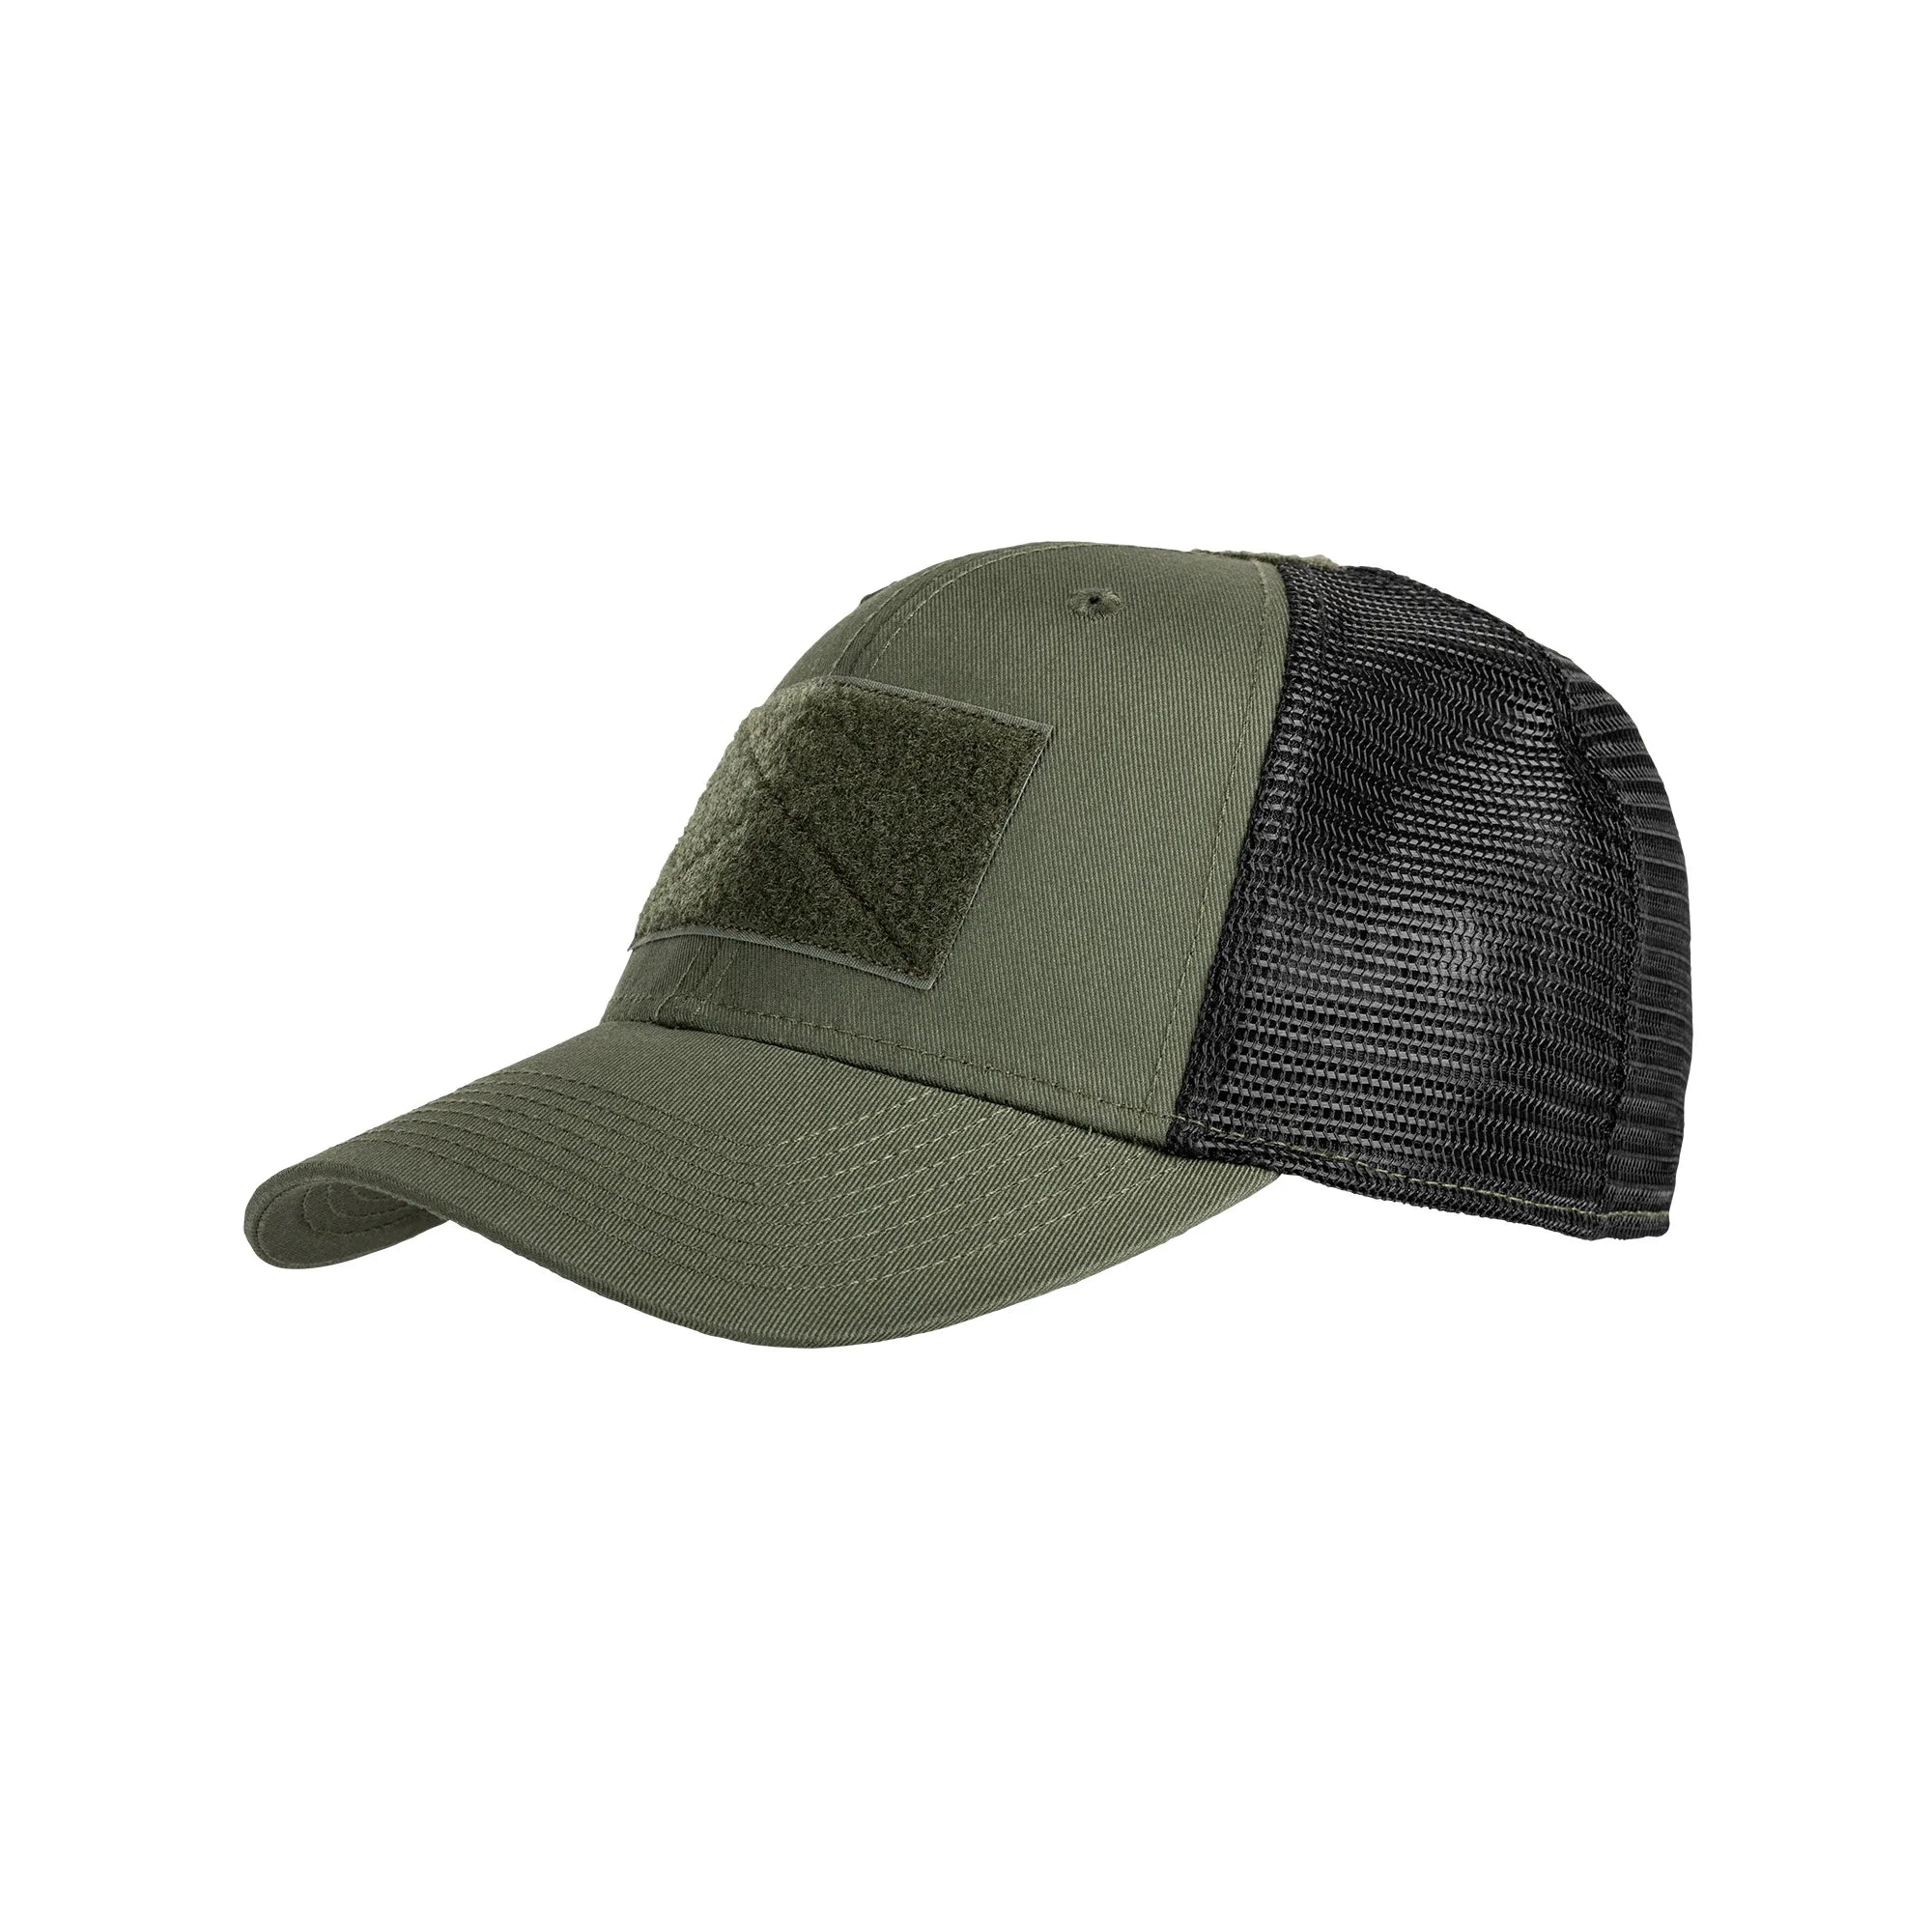 5.11 Tactical Trucker Caps & Free Patch